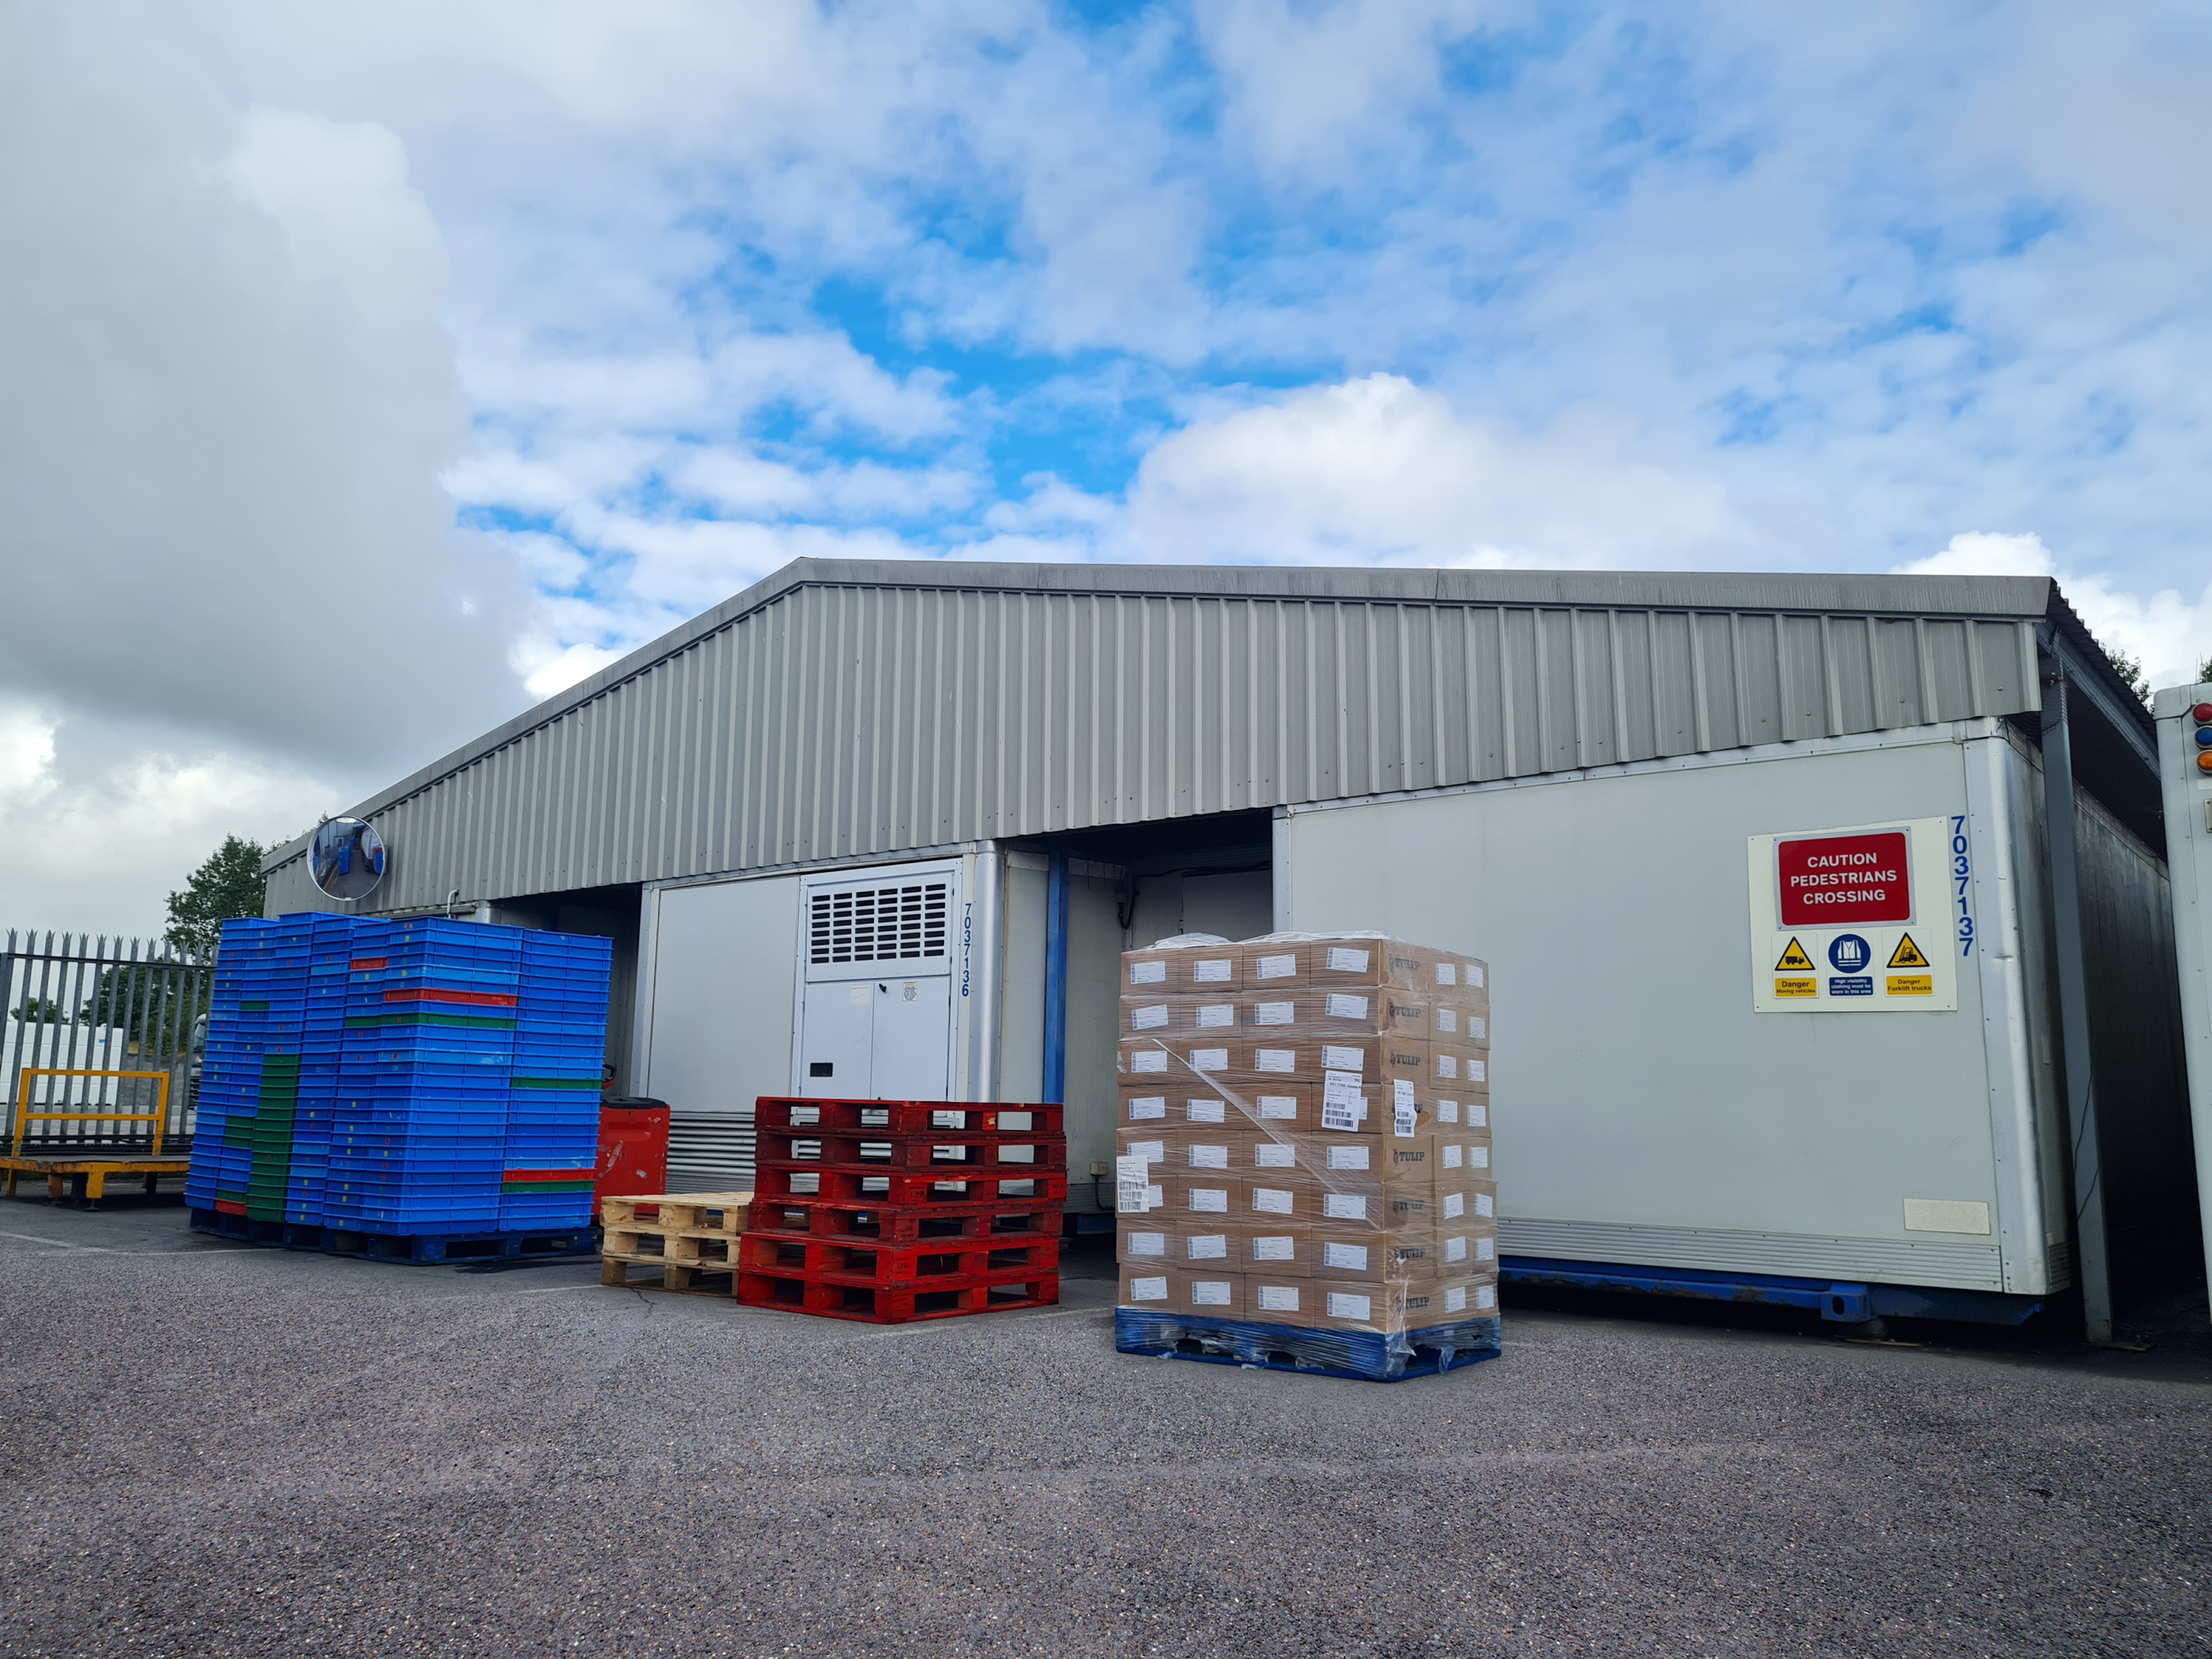 Dawsongroup tcs Ireland's three bay chilled storage facility for Domino's